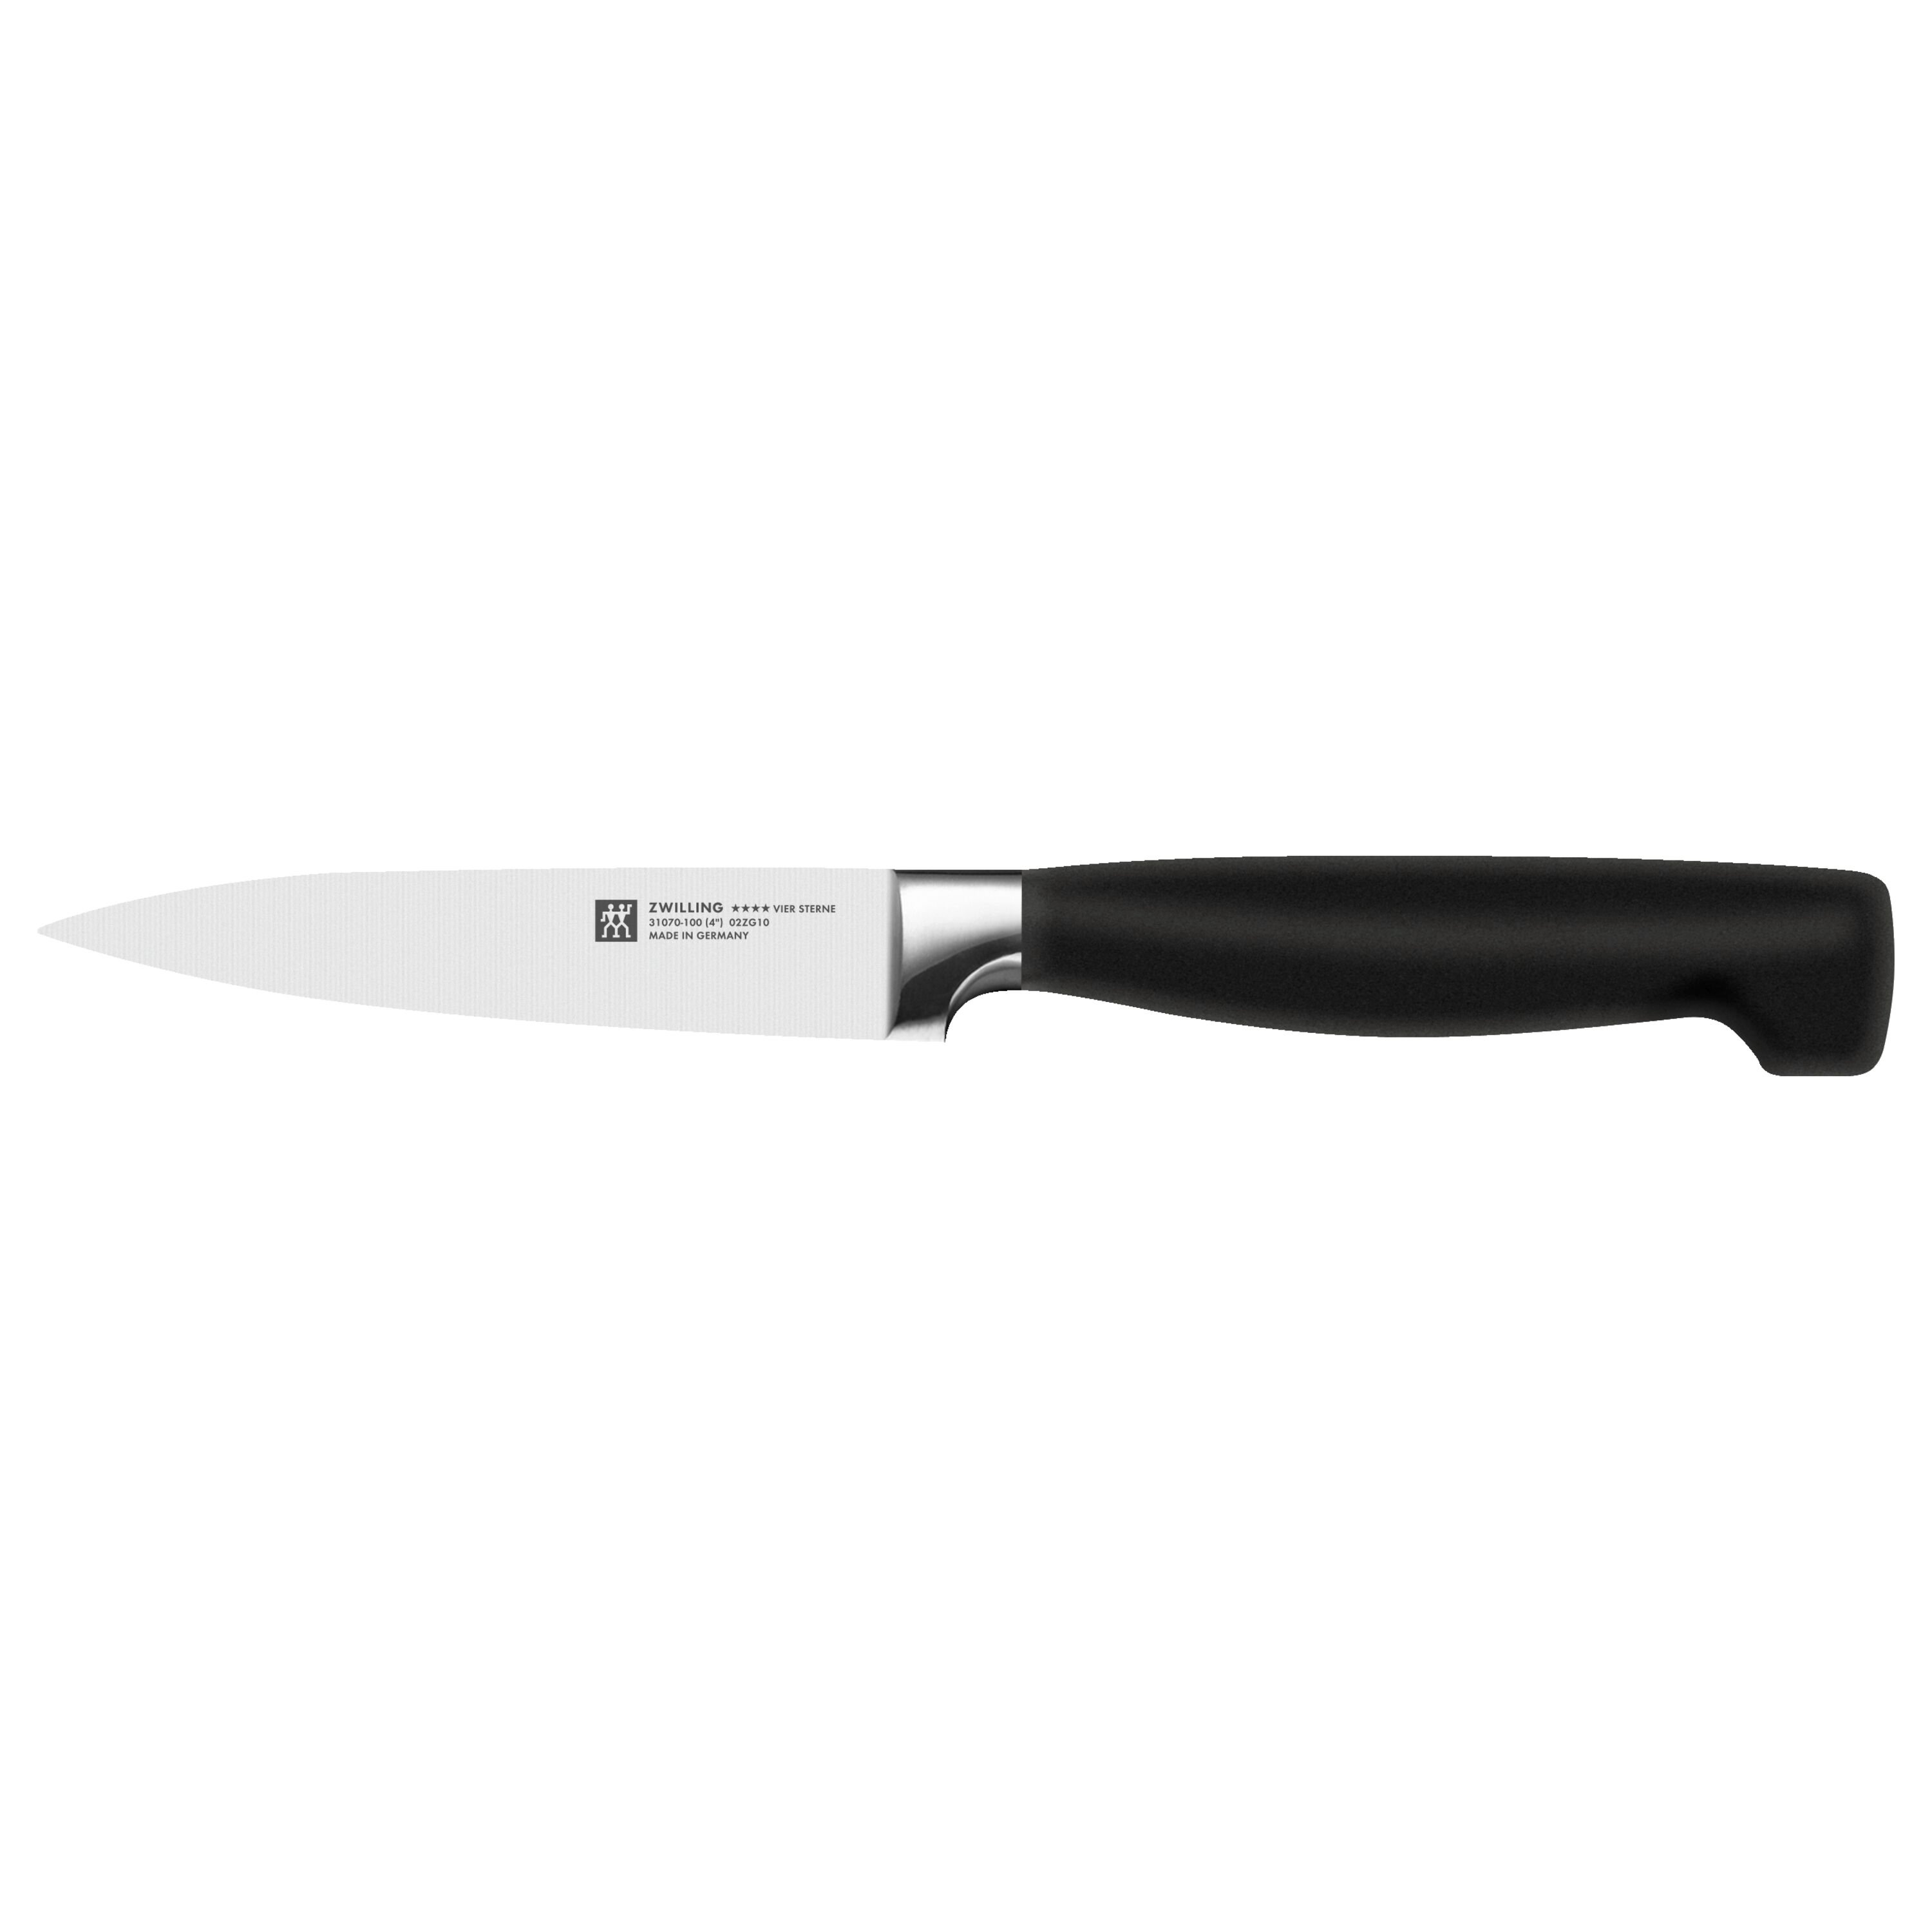 Buy ZWILLING **** Four Star Paring knife | ZWILLING.COM